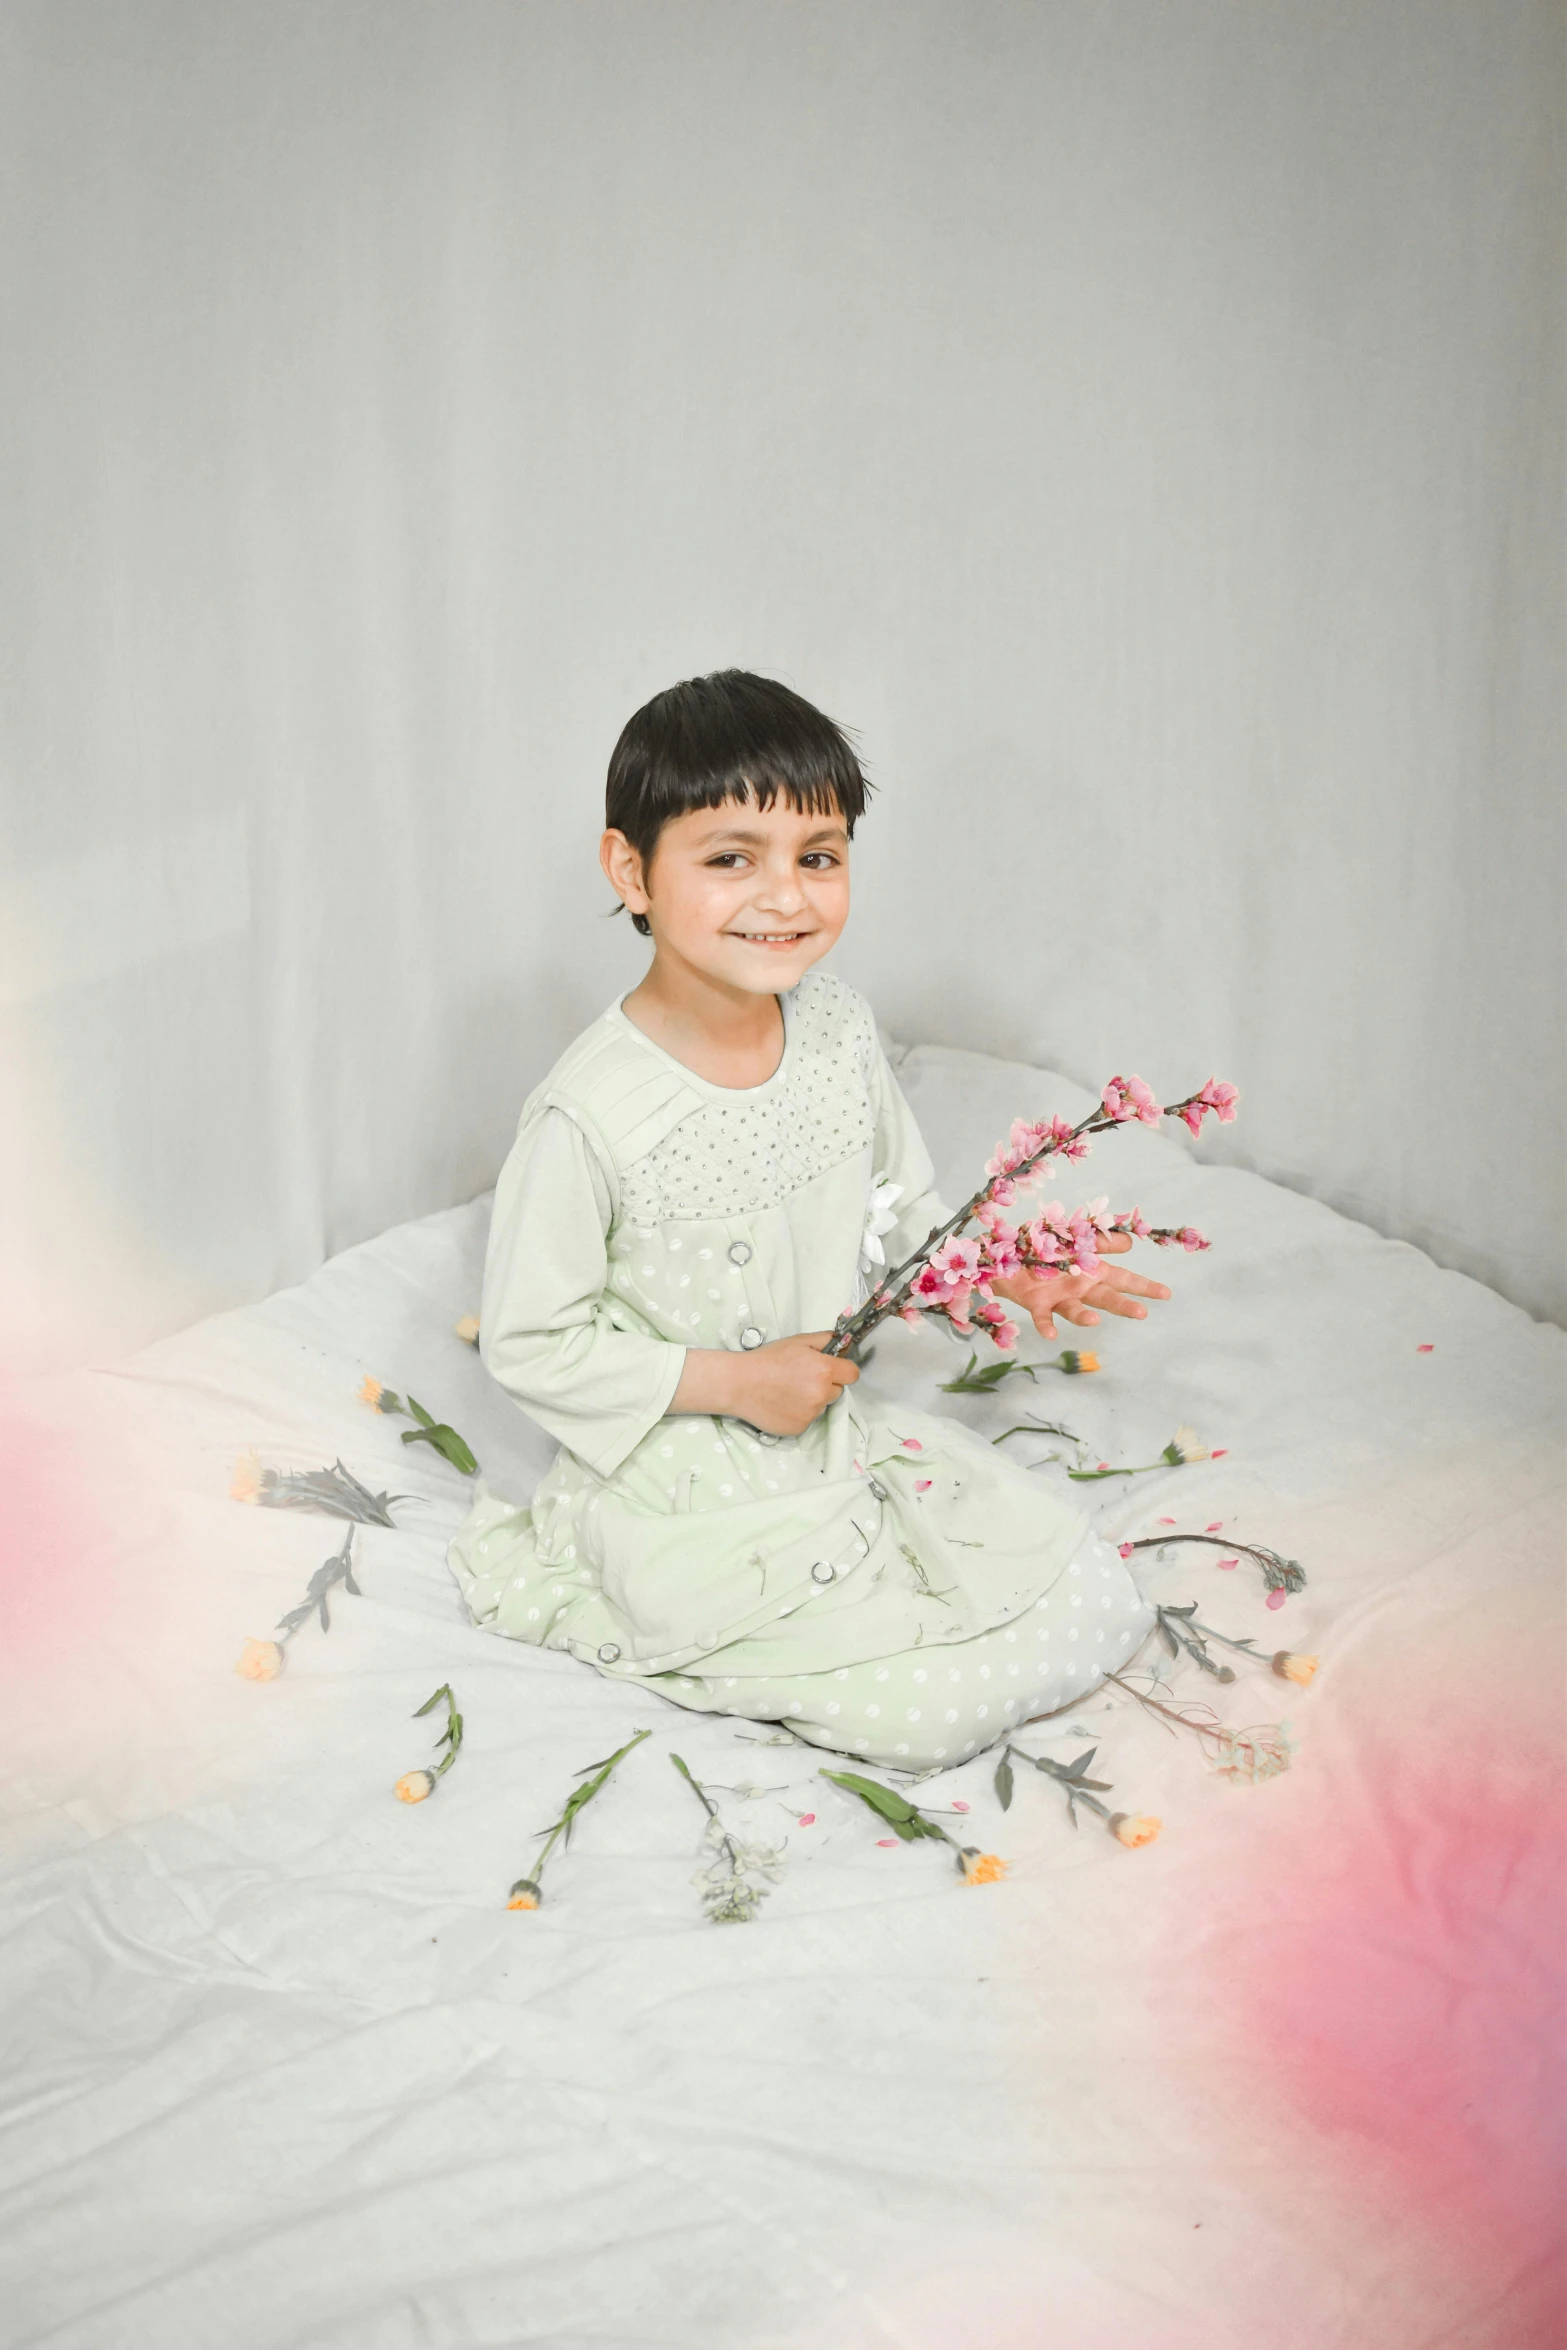 a little boy sitting on a bed with flowers on his feet